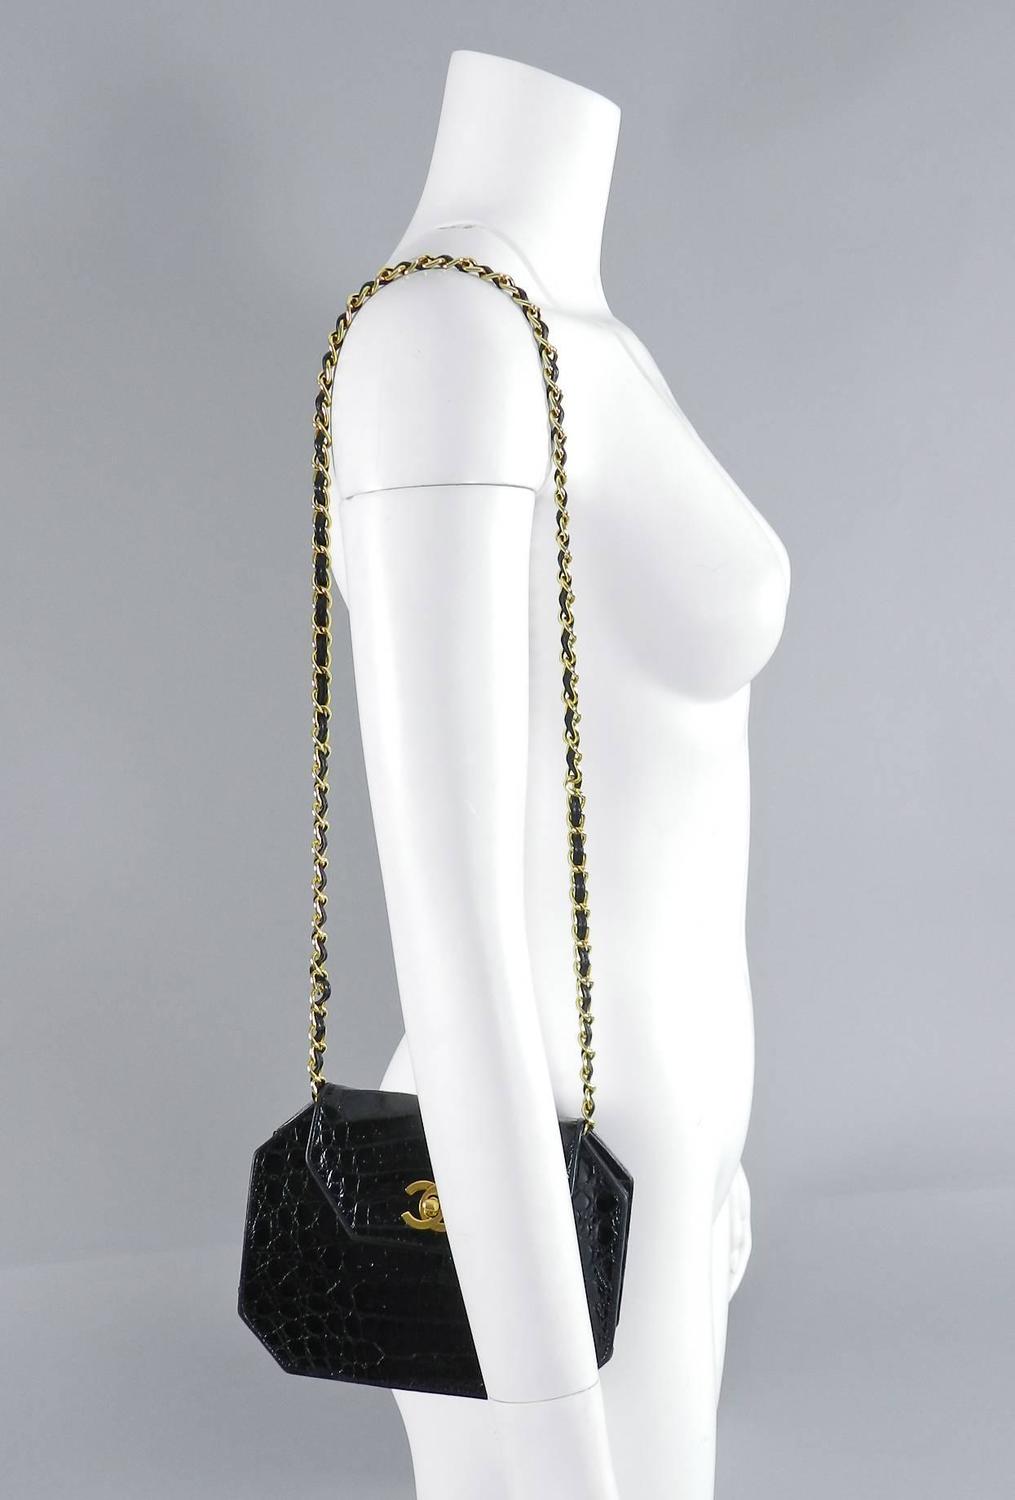 Chanel Black Crocodile Octagonal Purse with Chain Strap at 1stdibs